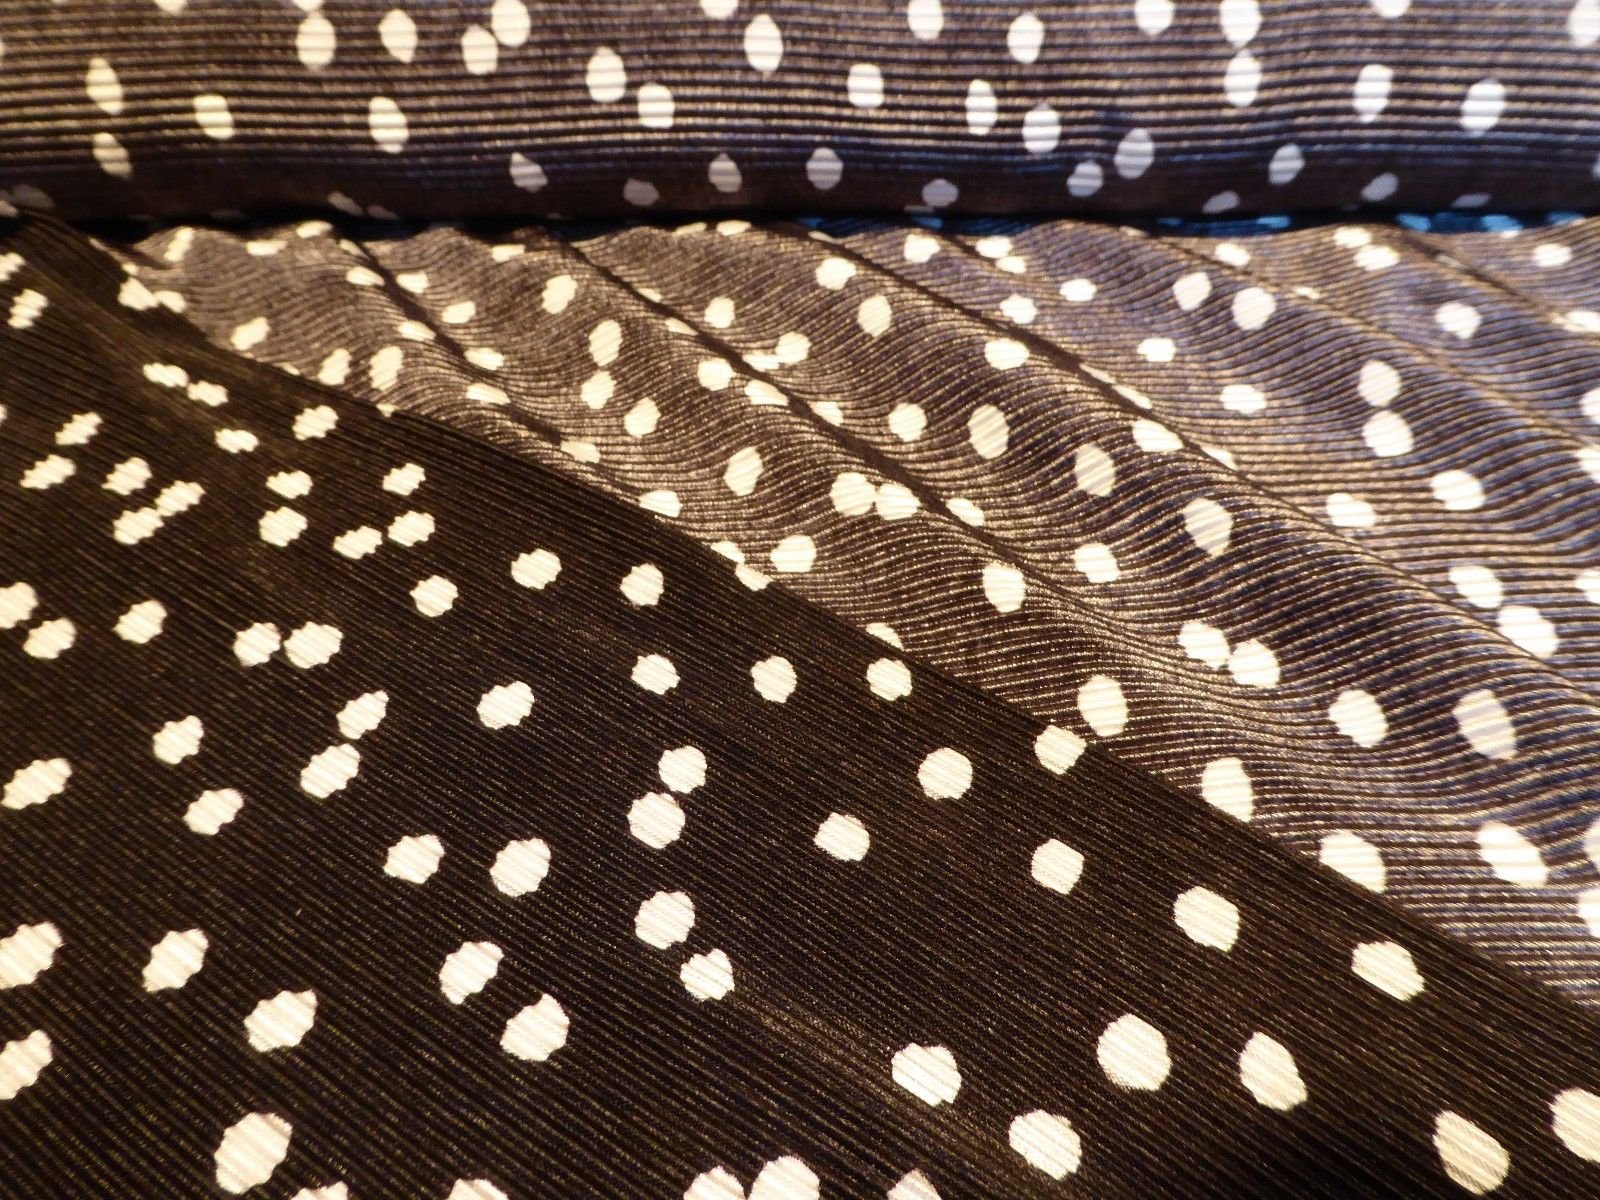 Black Satin Plisse with Scattered White Dots - Micropleated, Flattering ...